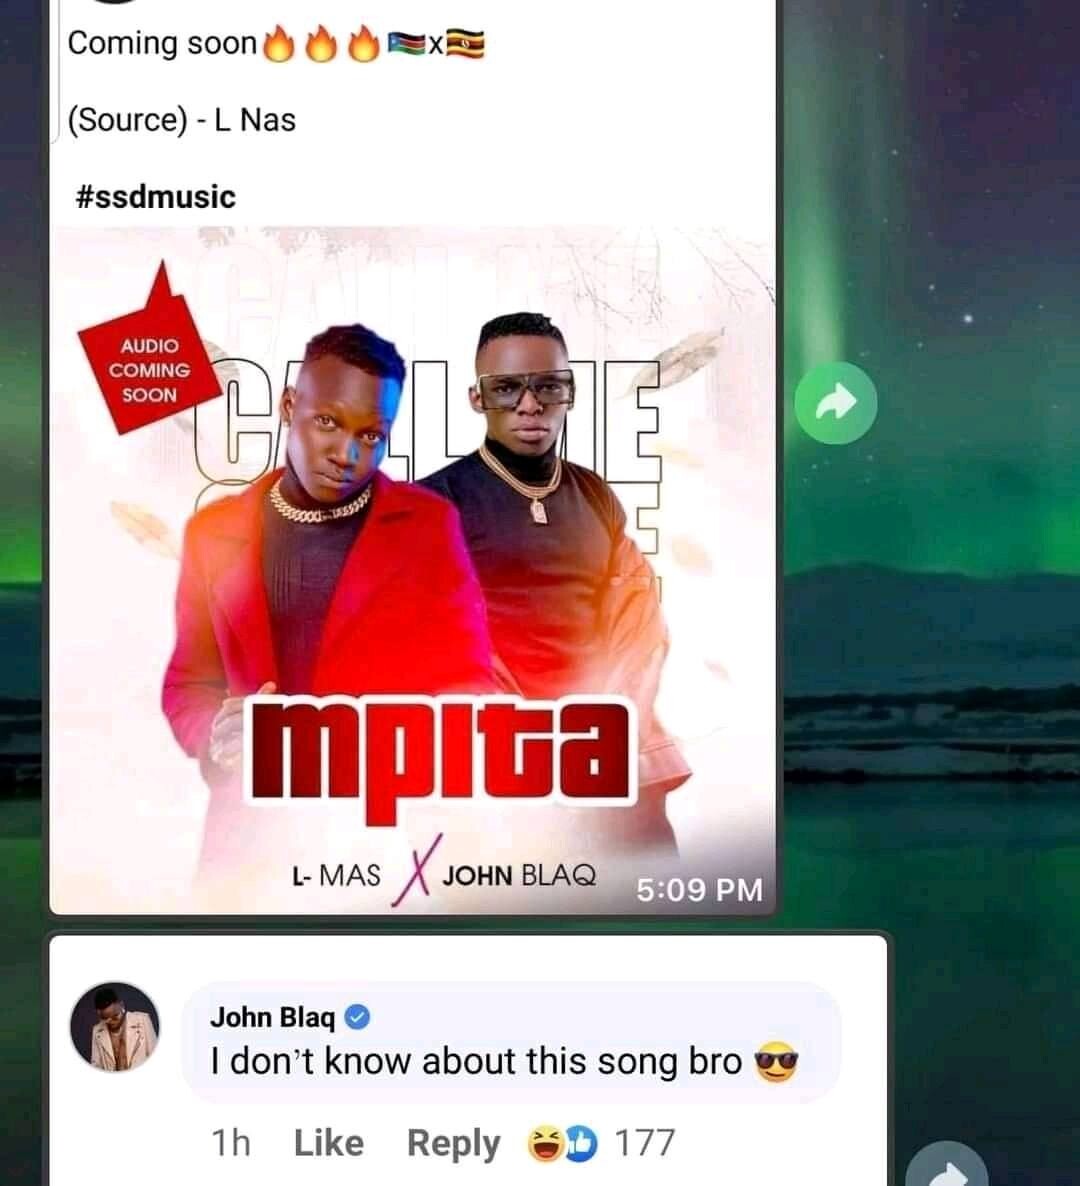 John Blaq's reply showing he denied the song